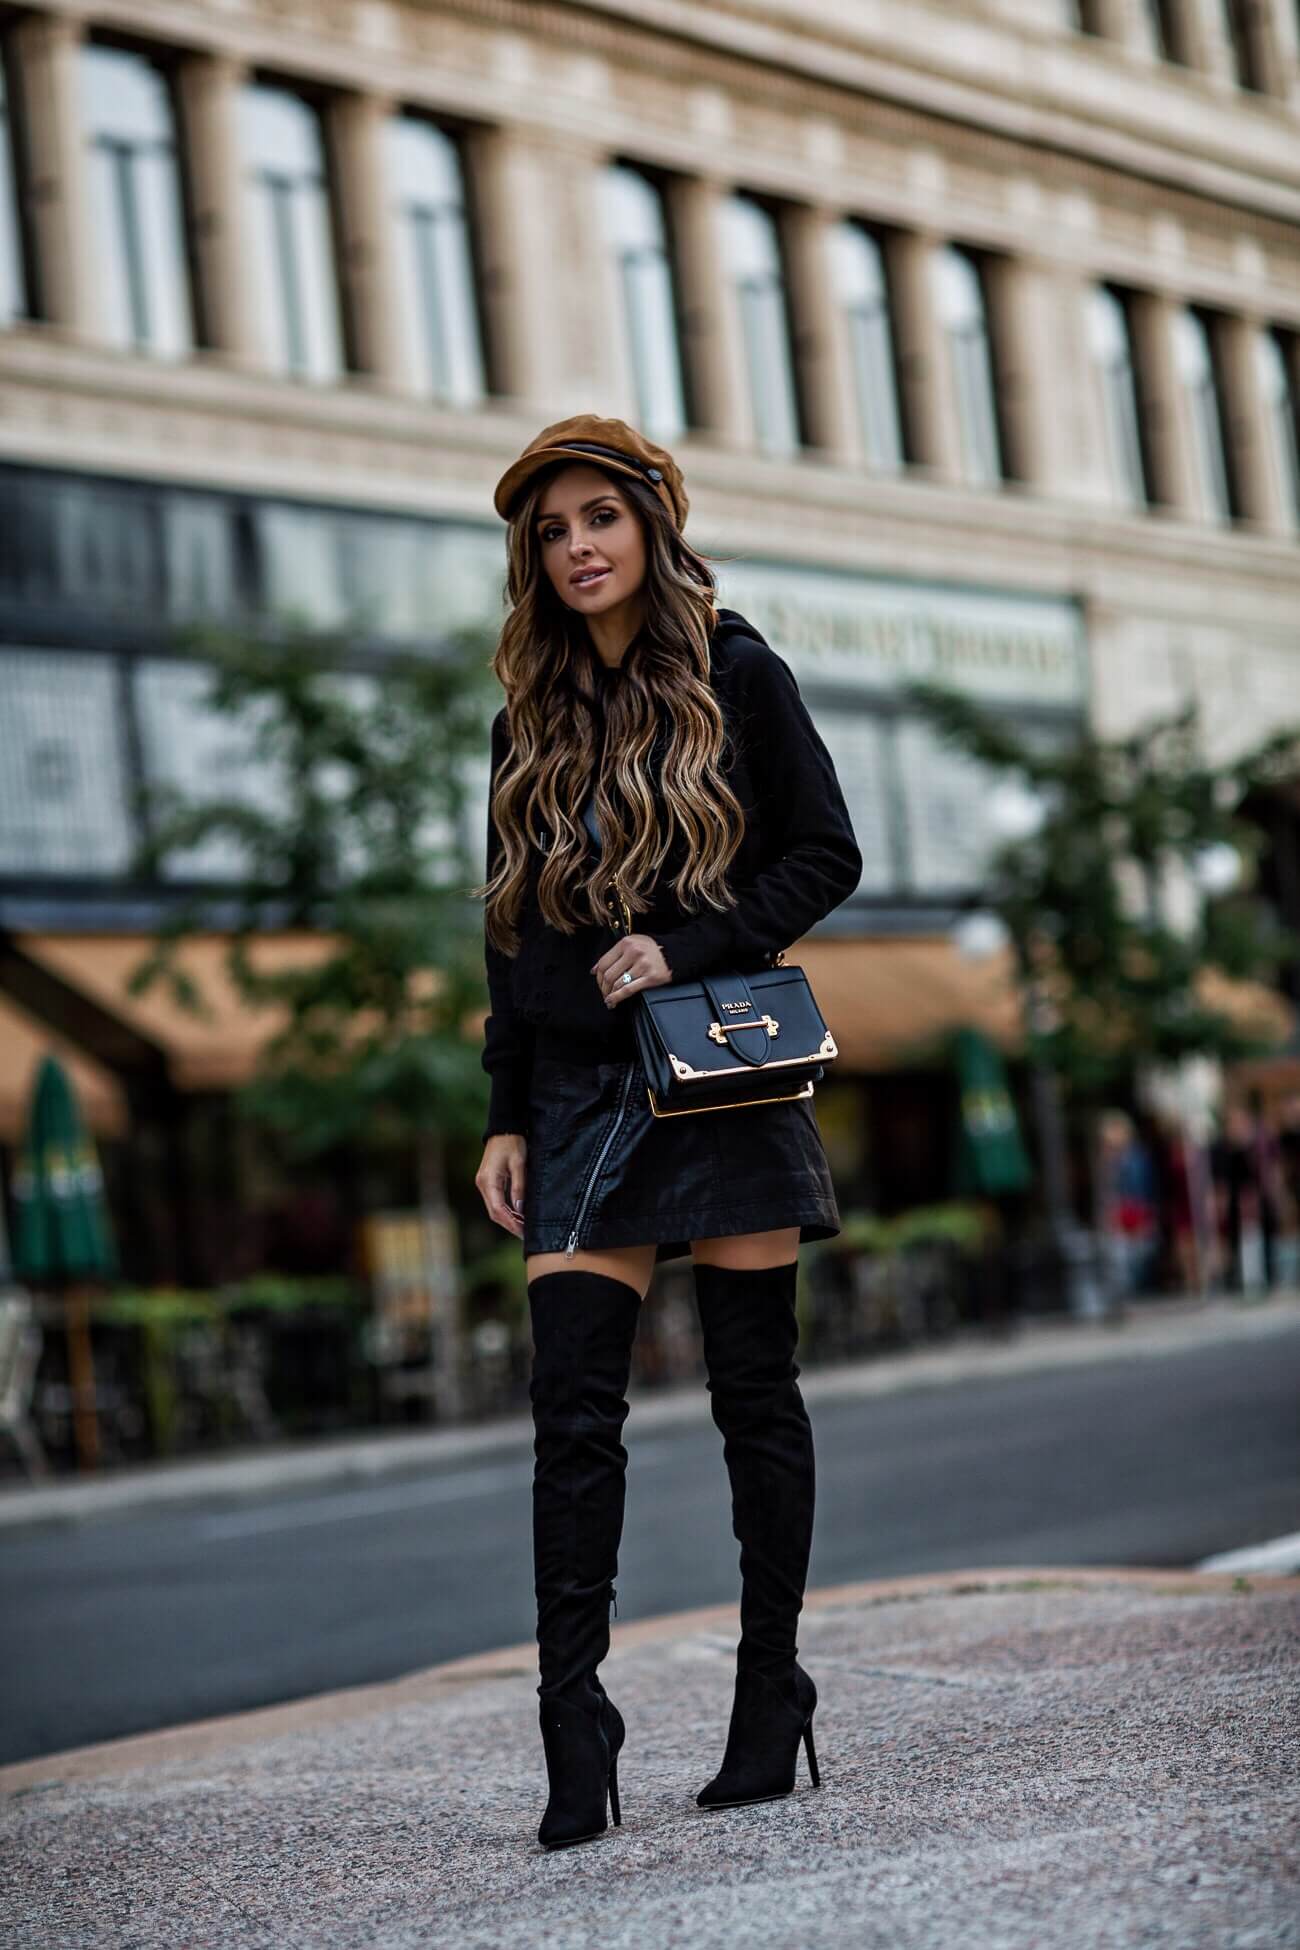 fashion blogger mia mia mine wearing over-the-knee boots and a prada cahier bag